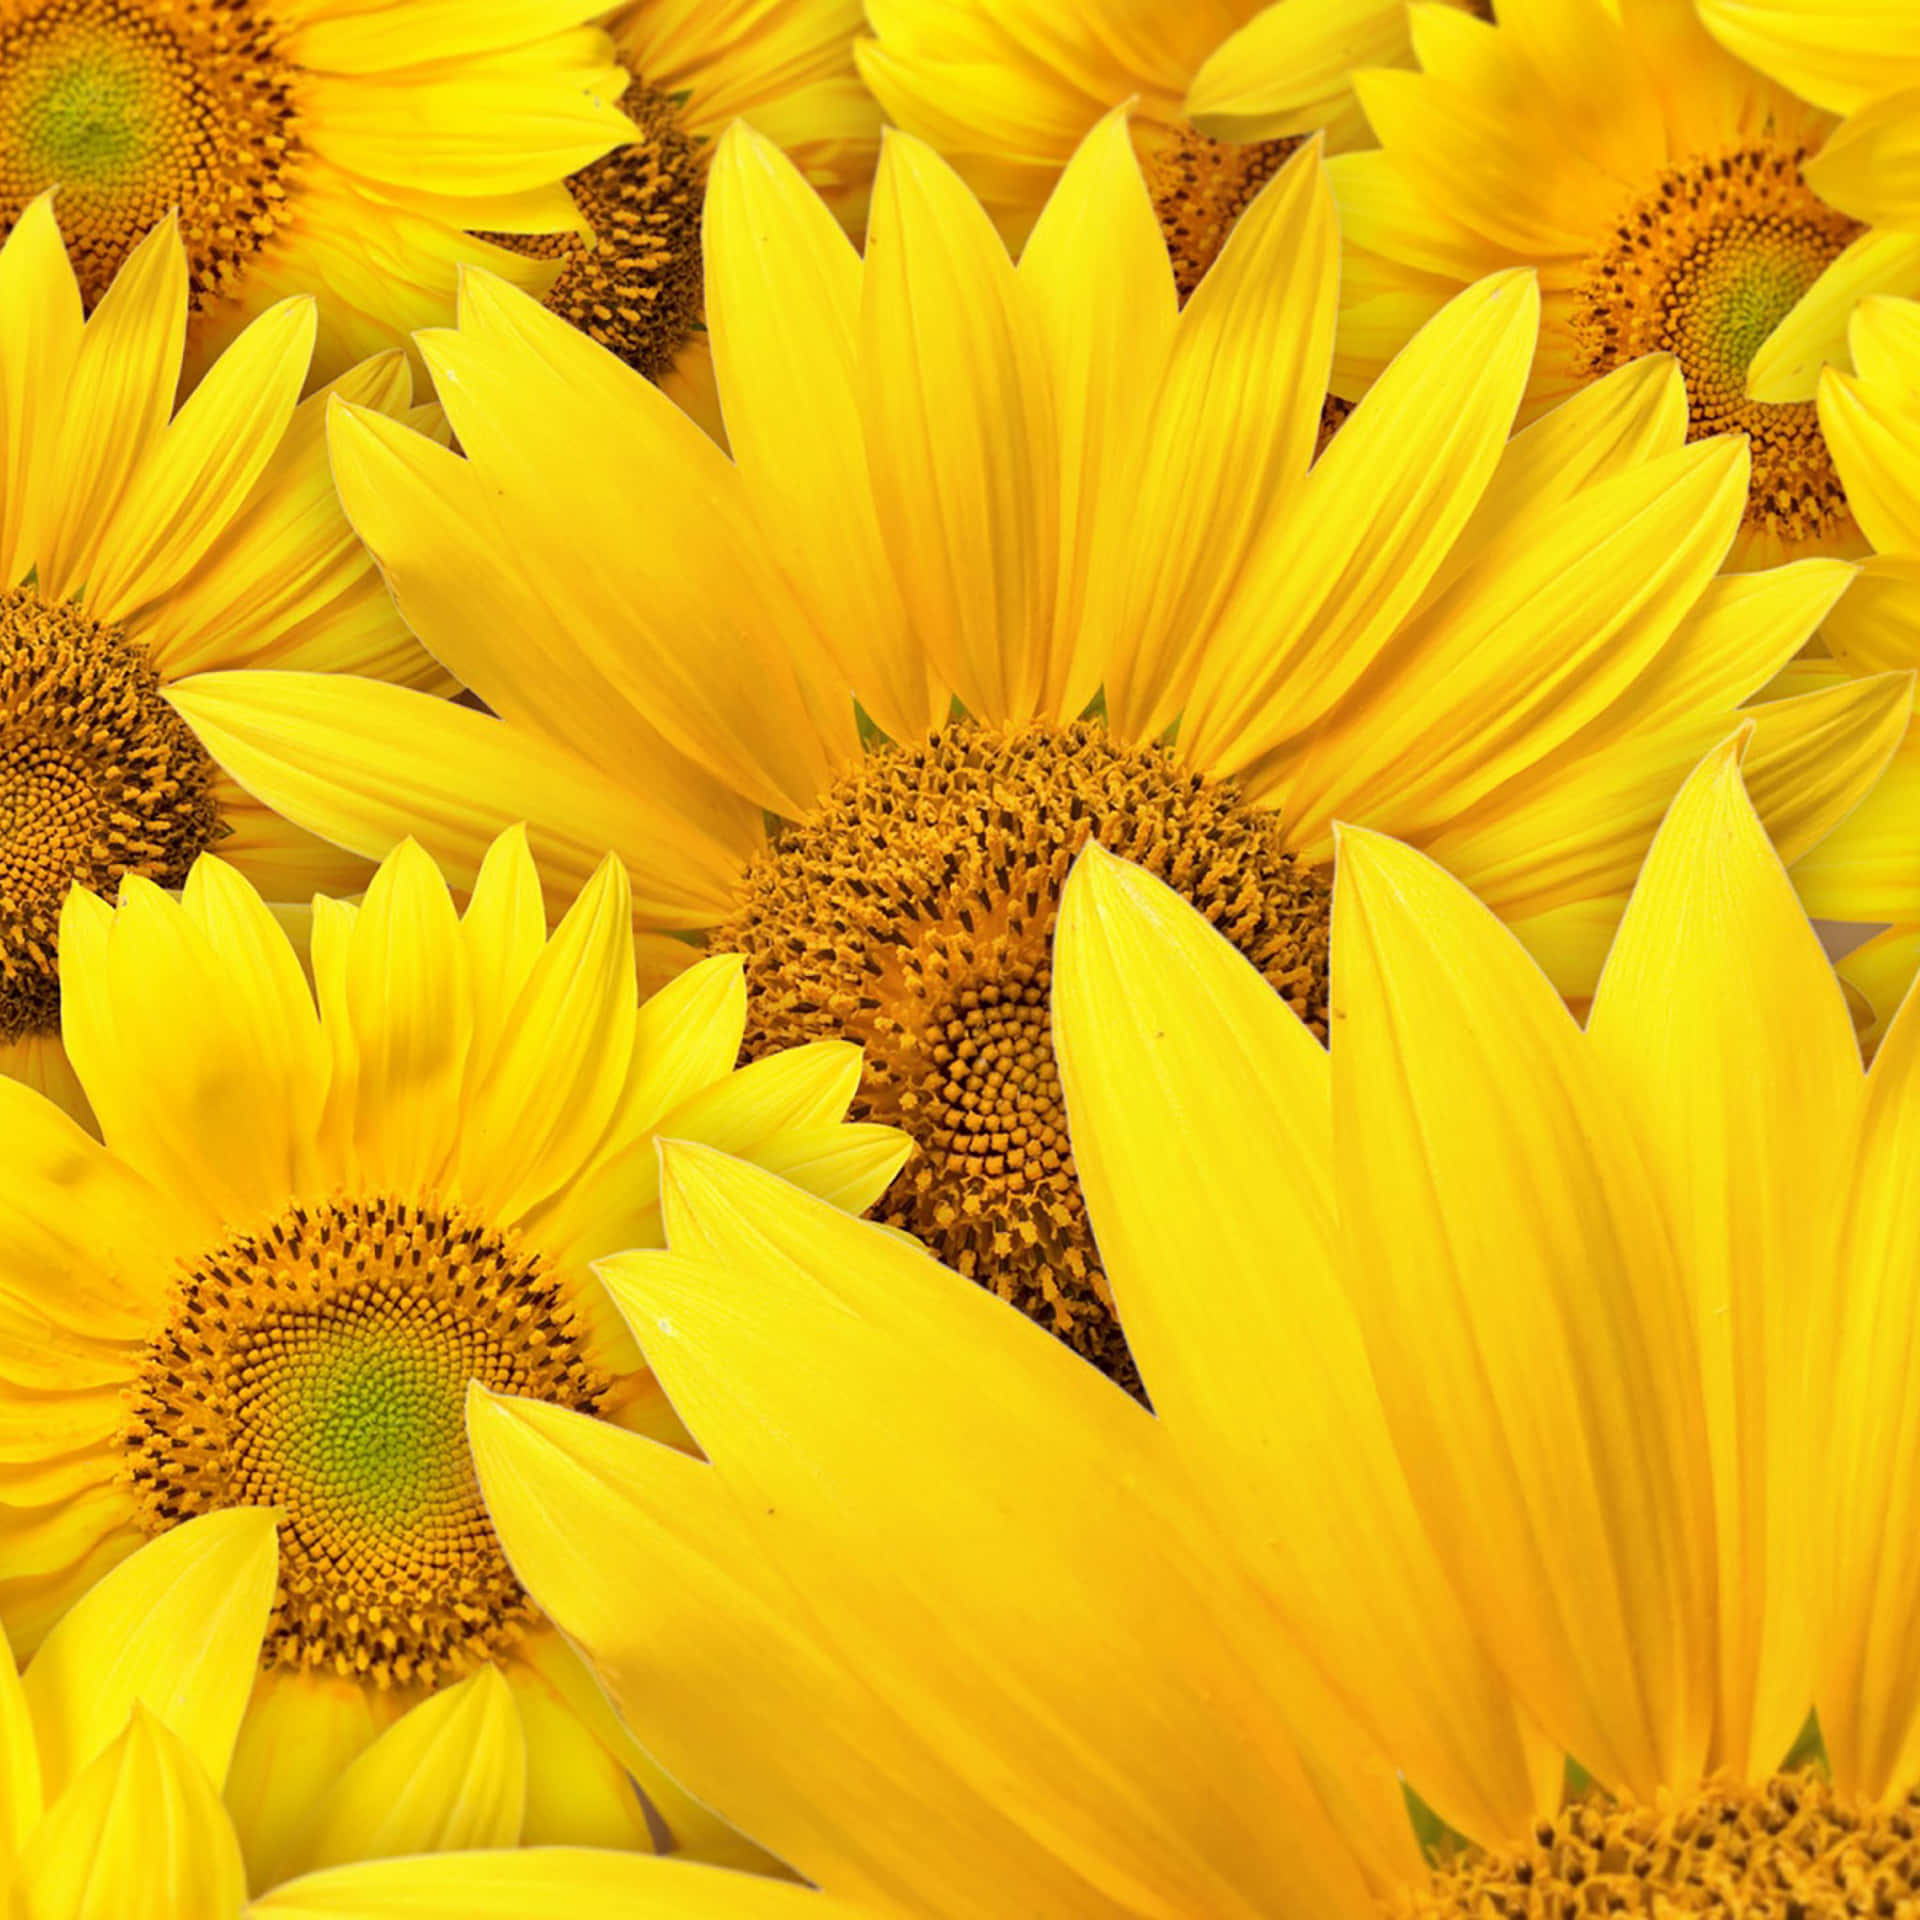 Stacked Yellow Sunflowers Ipad Picture